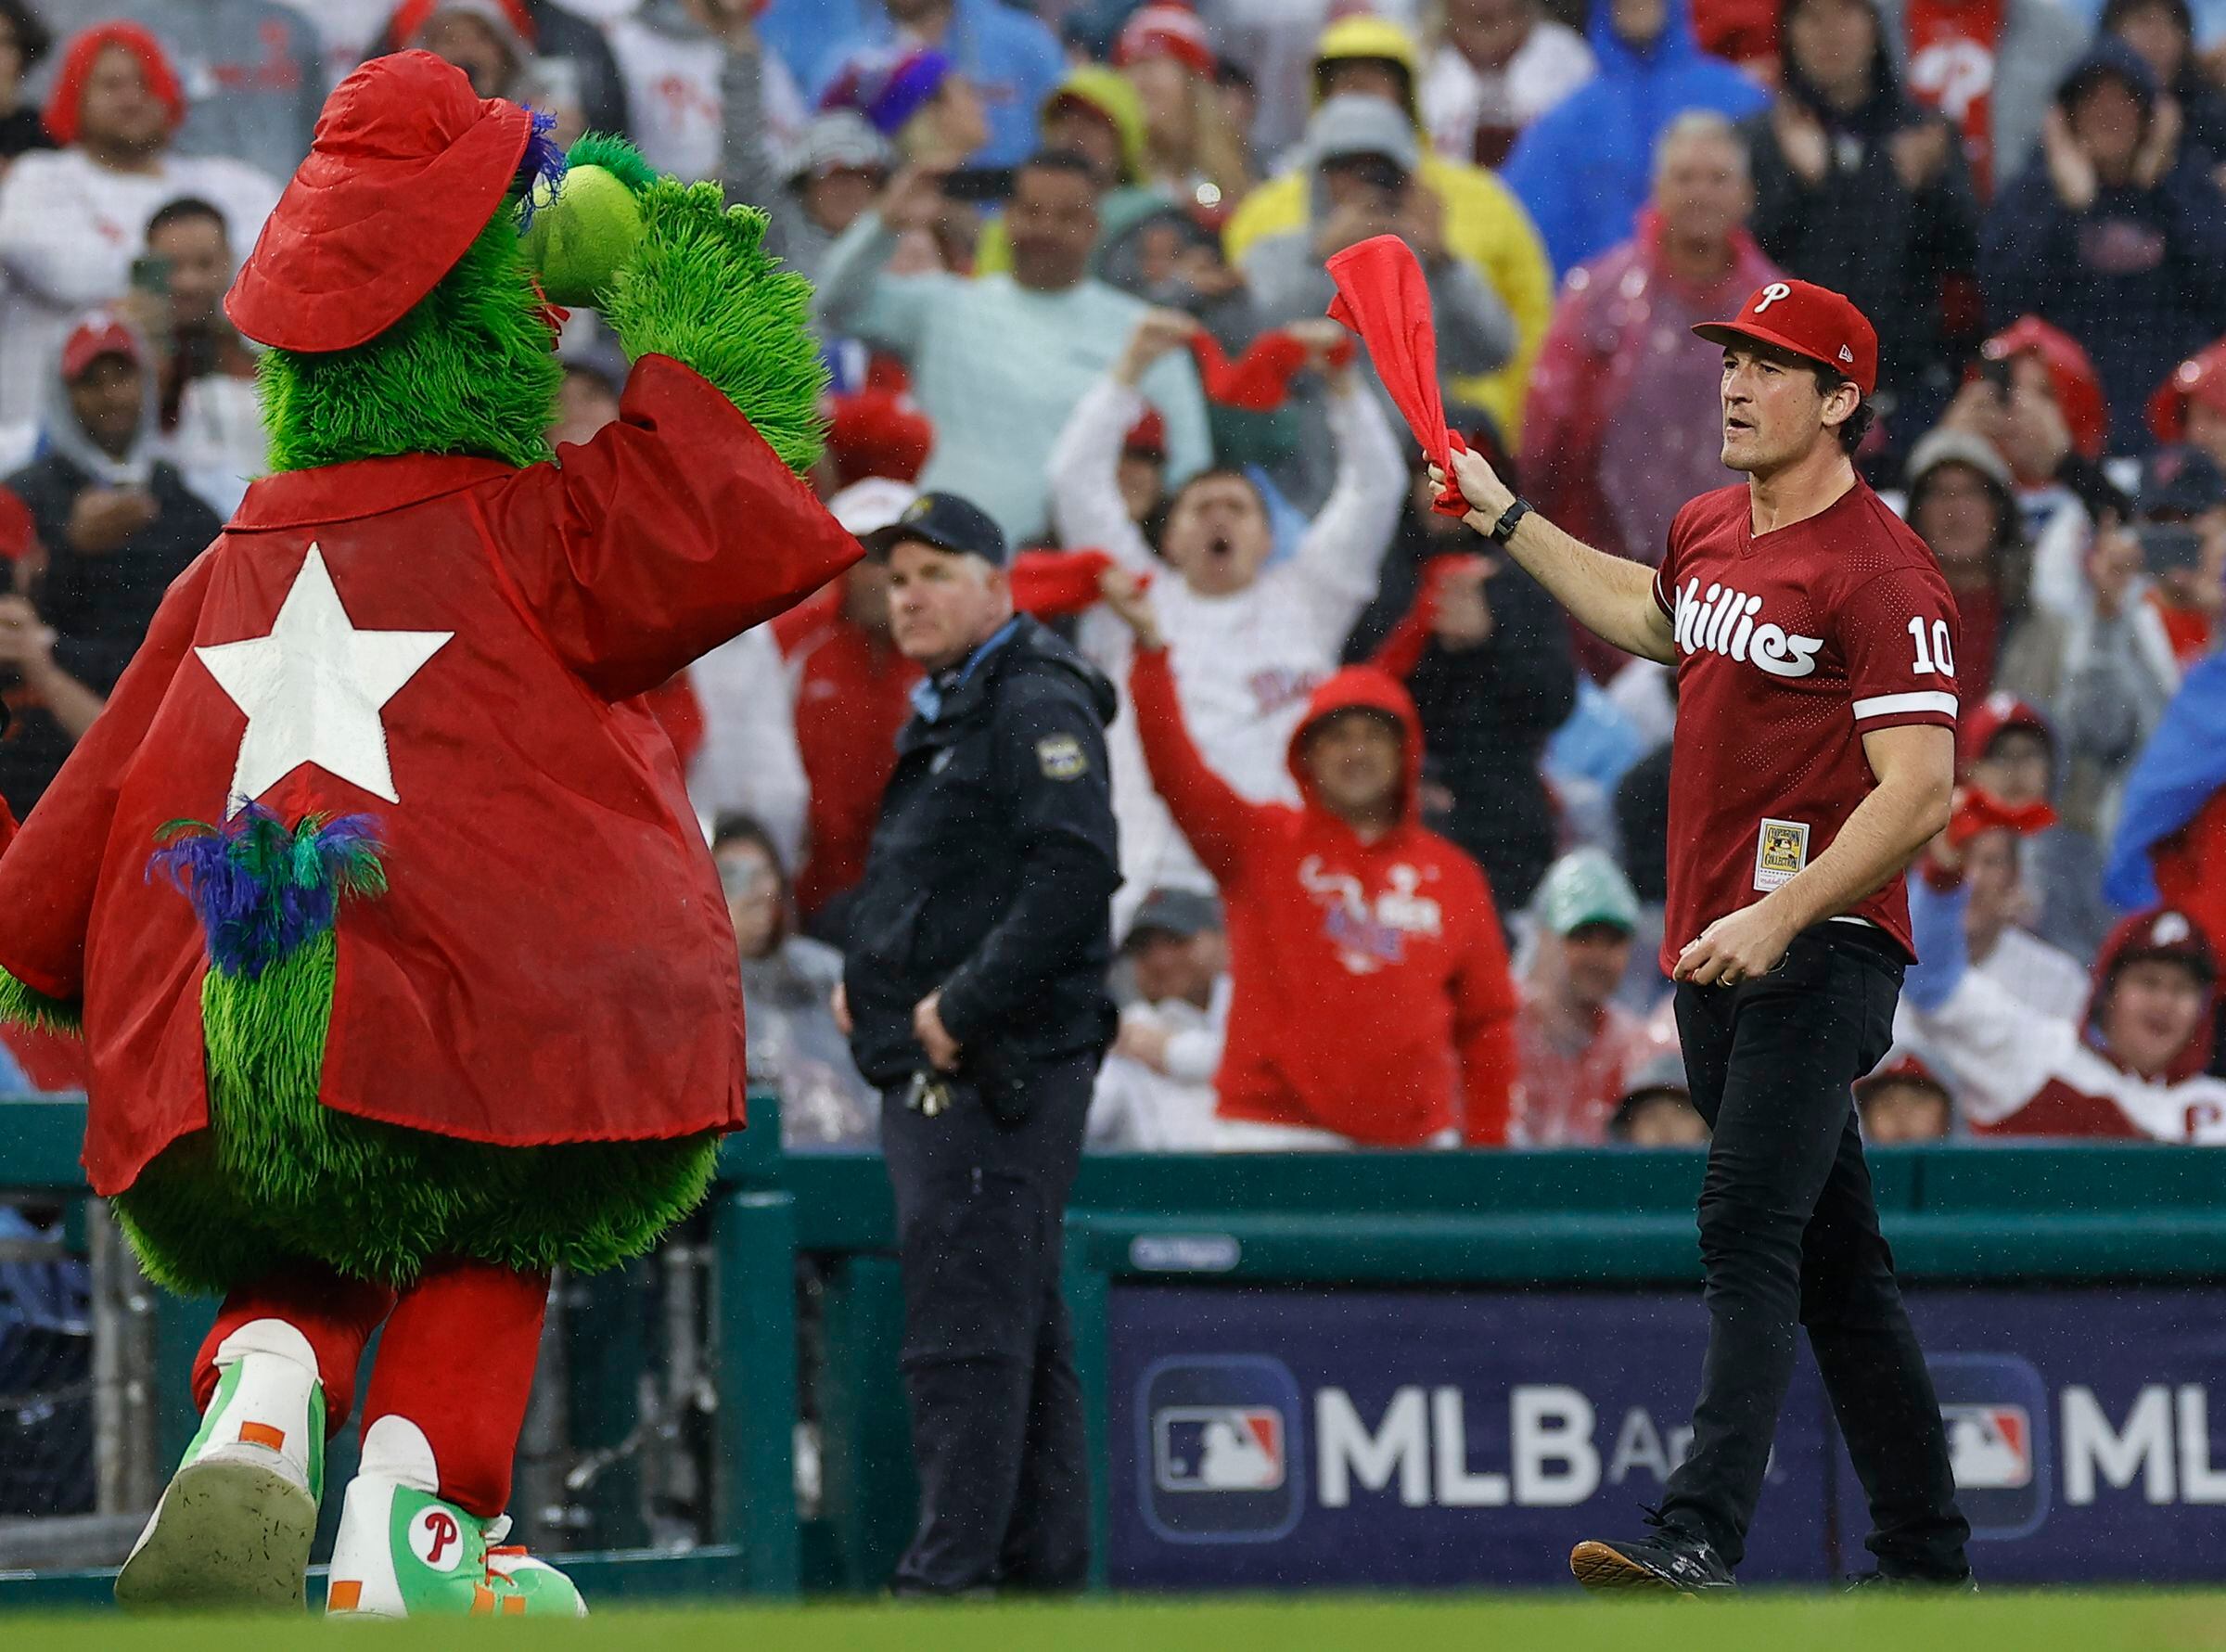 Astros-Phillies World Series: Postponed Game 3 on Halloween allowed players  to take kids trick-or-treating in Philadelphia hotel - ABC13 Houston